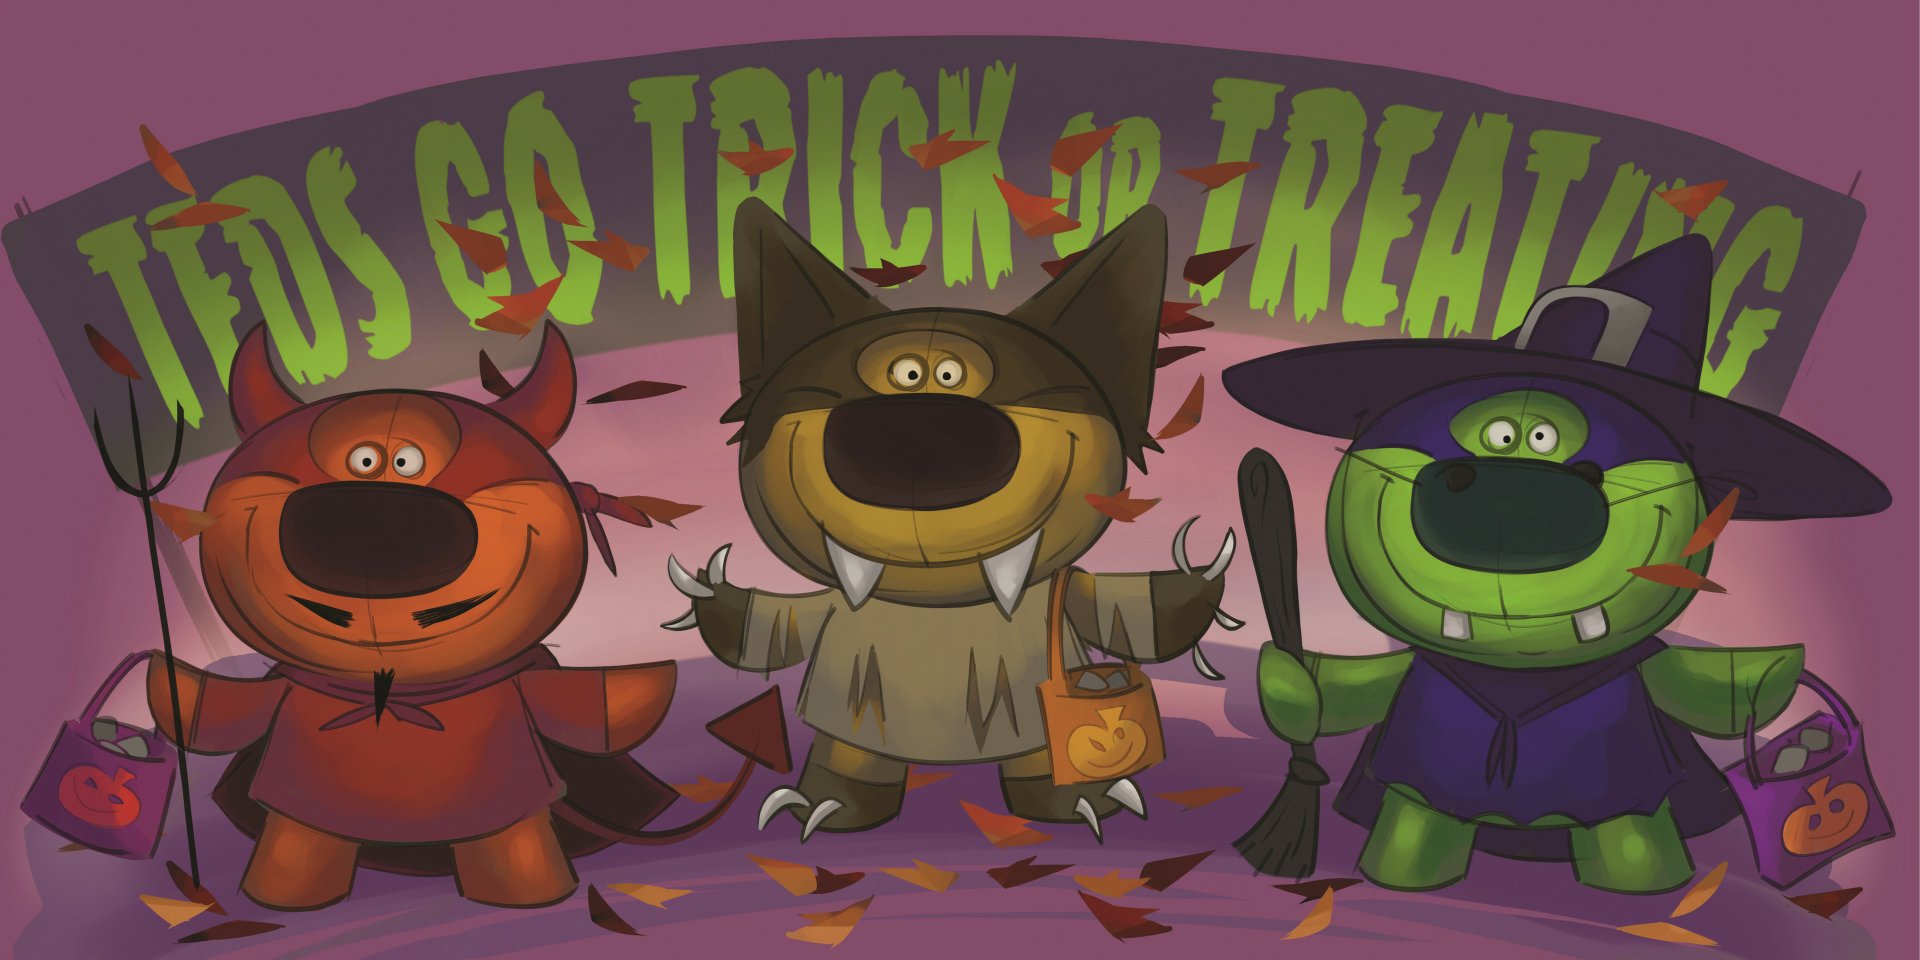 Teds go trick or treating by Martin Clapp